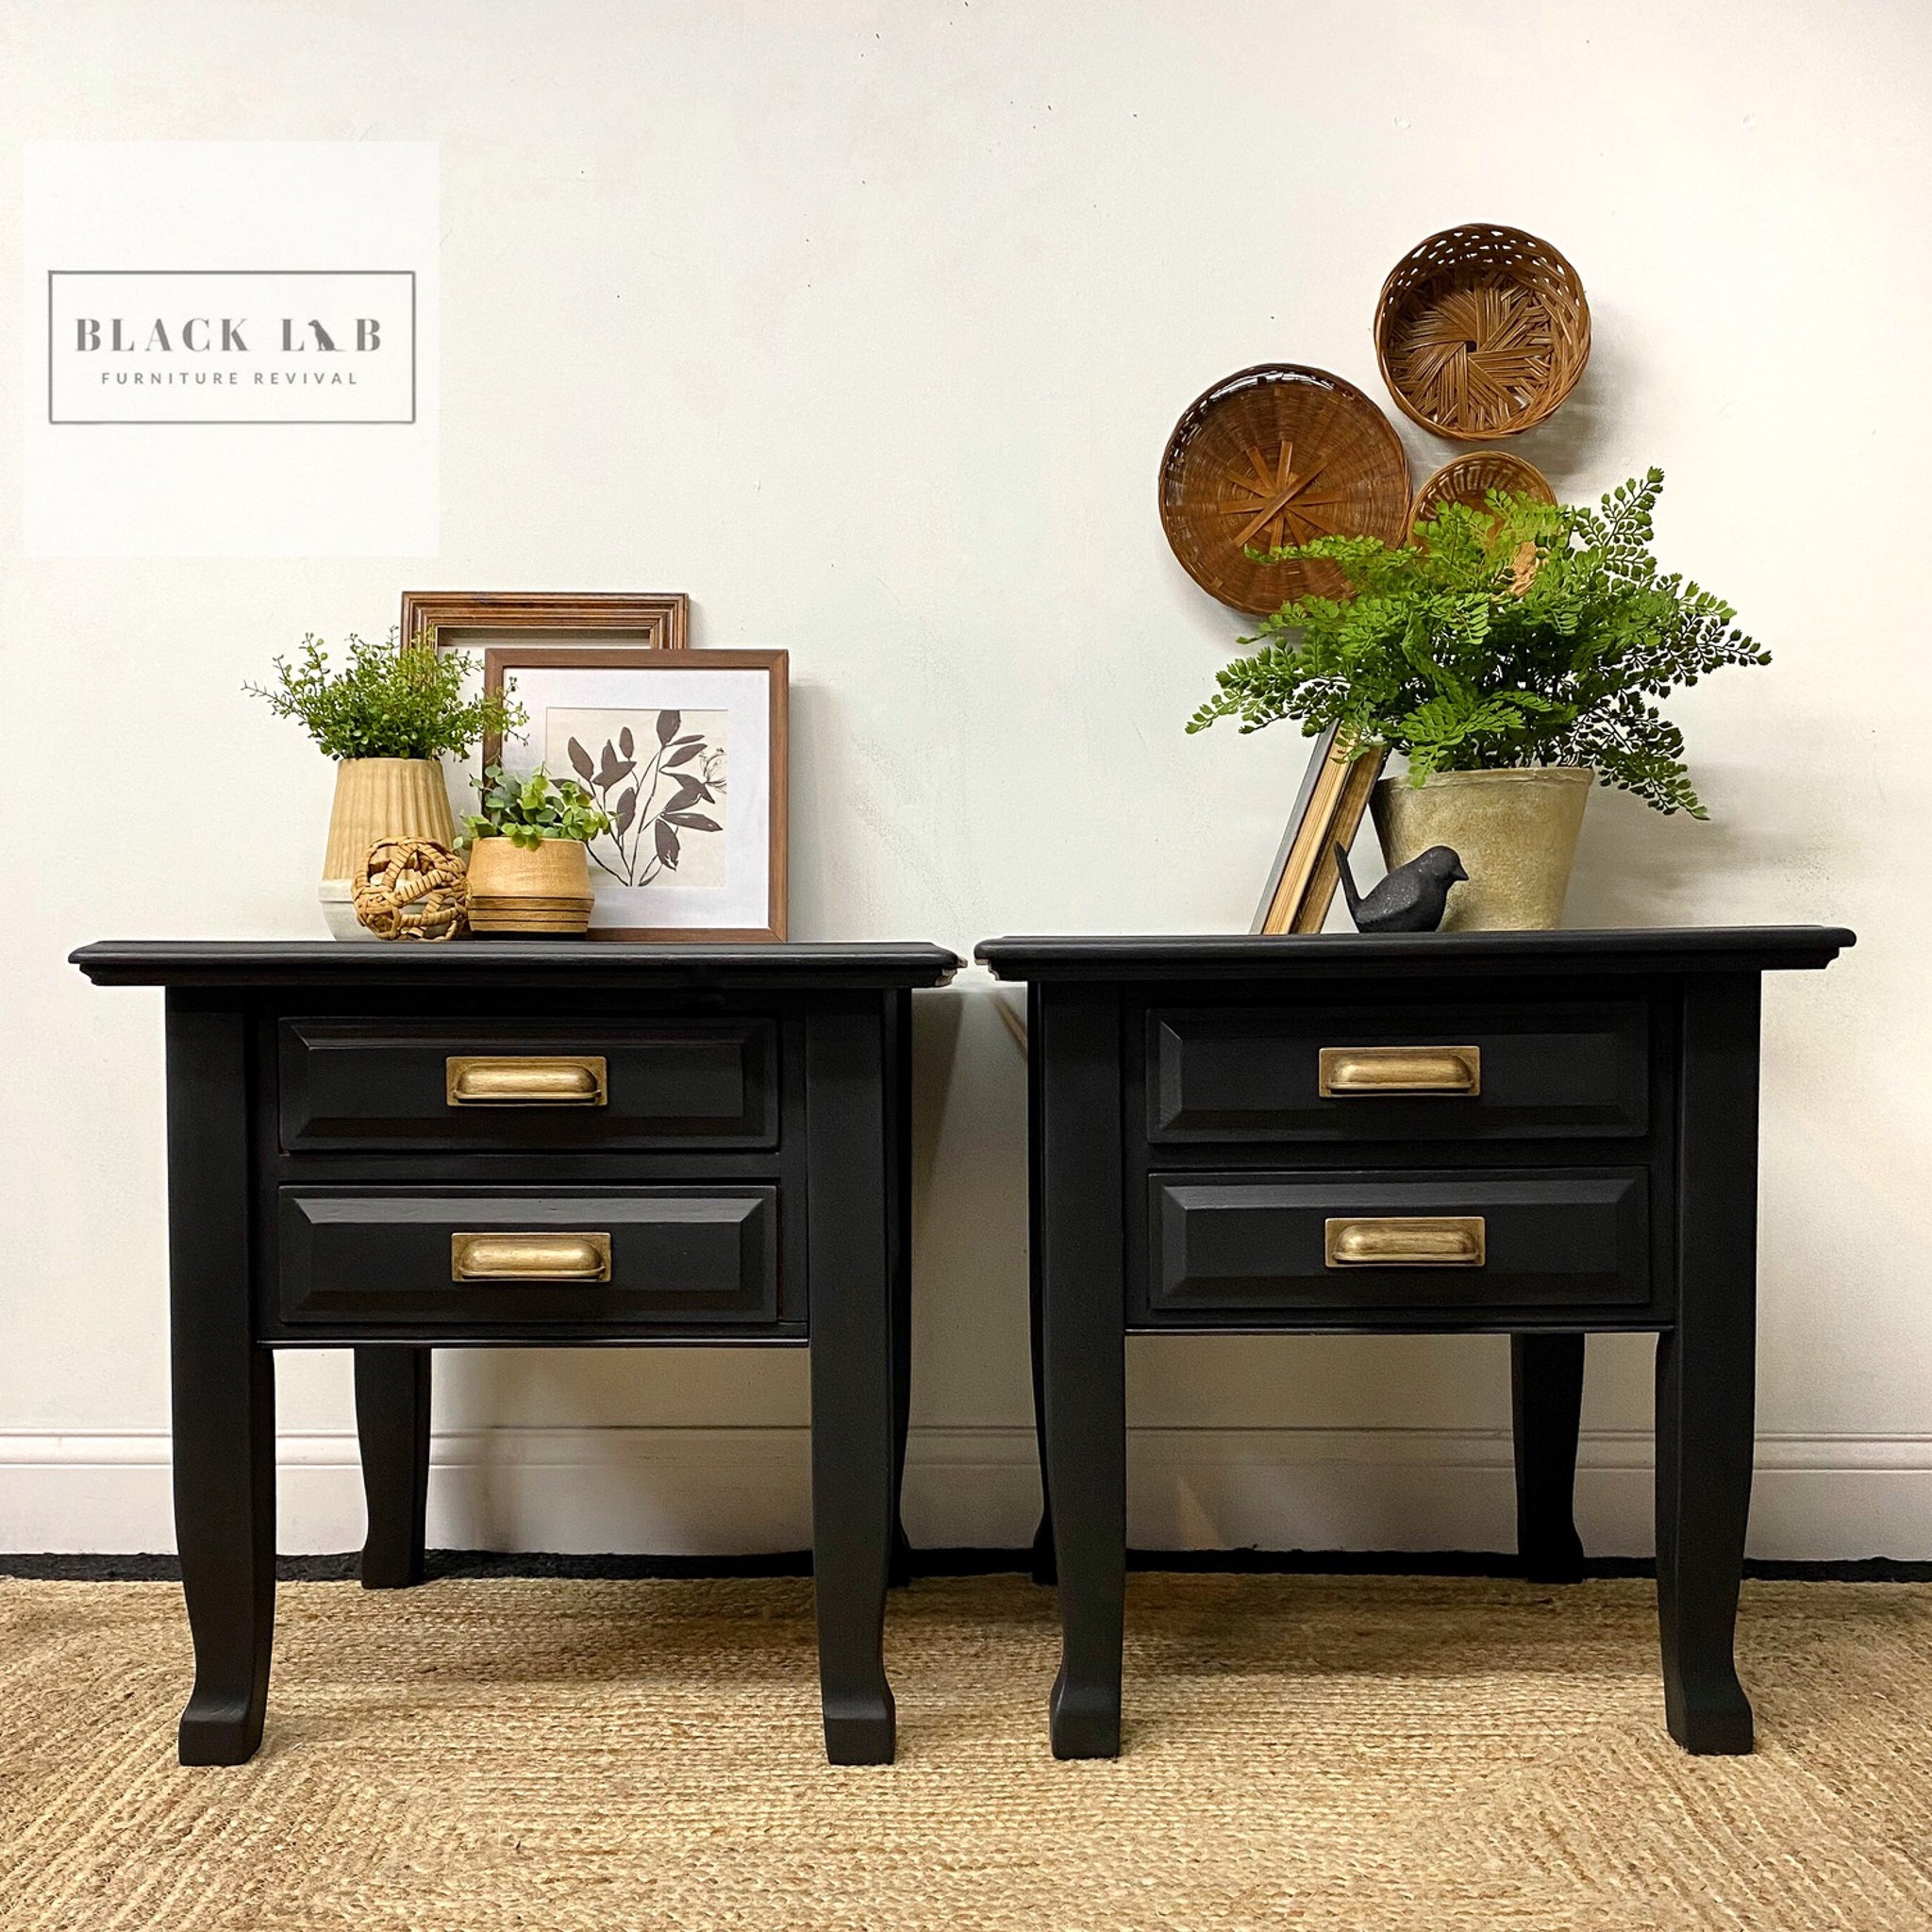 Two vintage nightstands refurbished by Black Lab Furniture Revival have gold drawer pulls and are painted in Dixie Belle's Caviar chalk mineral paint.